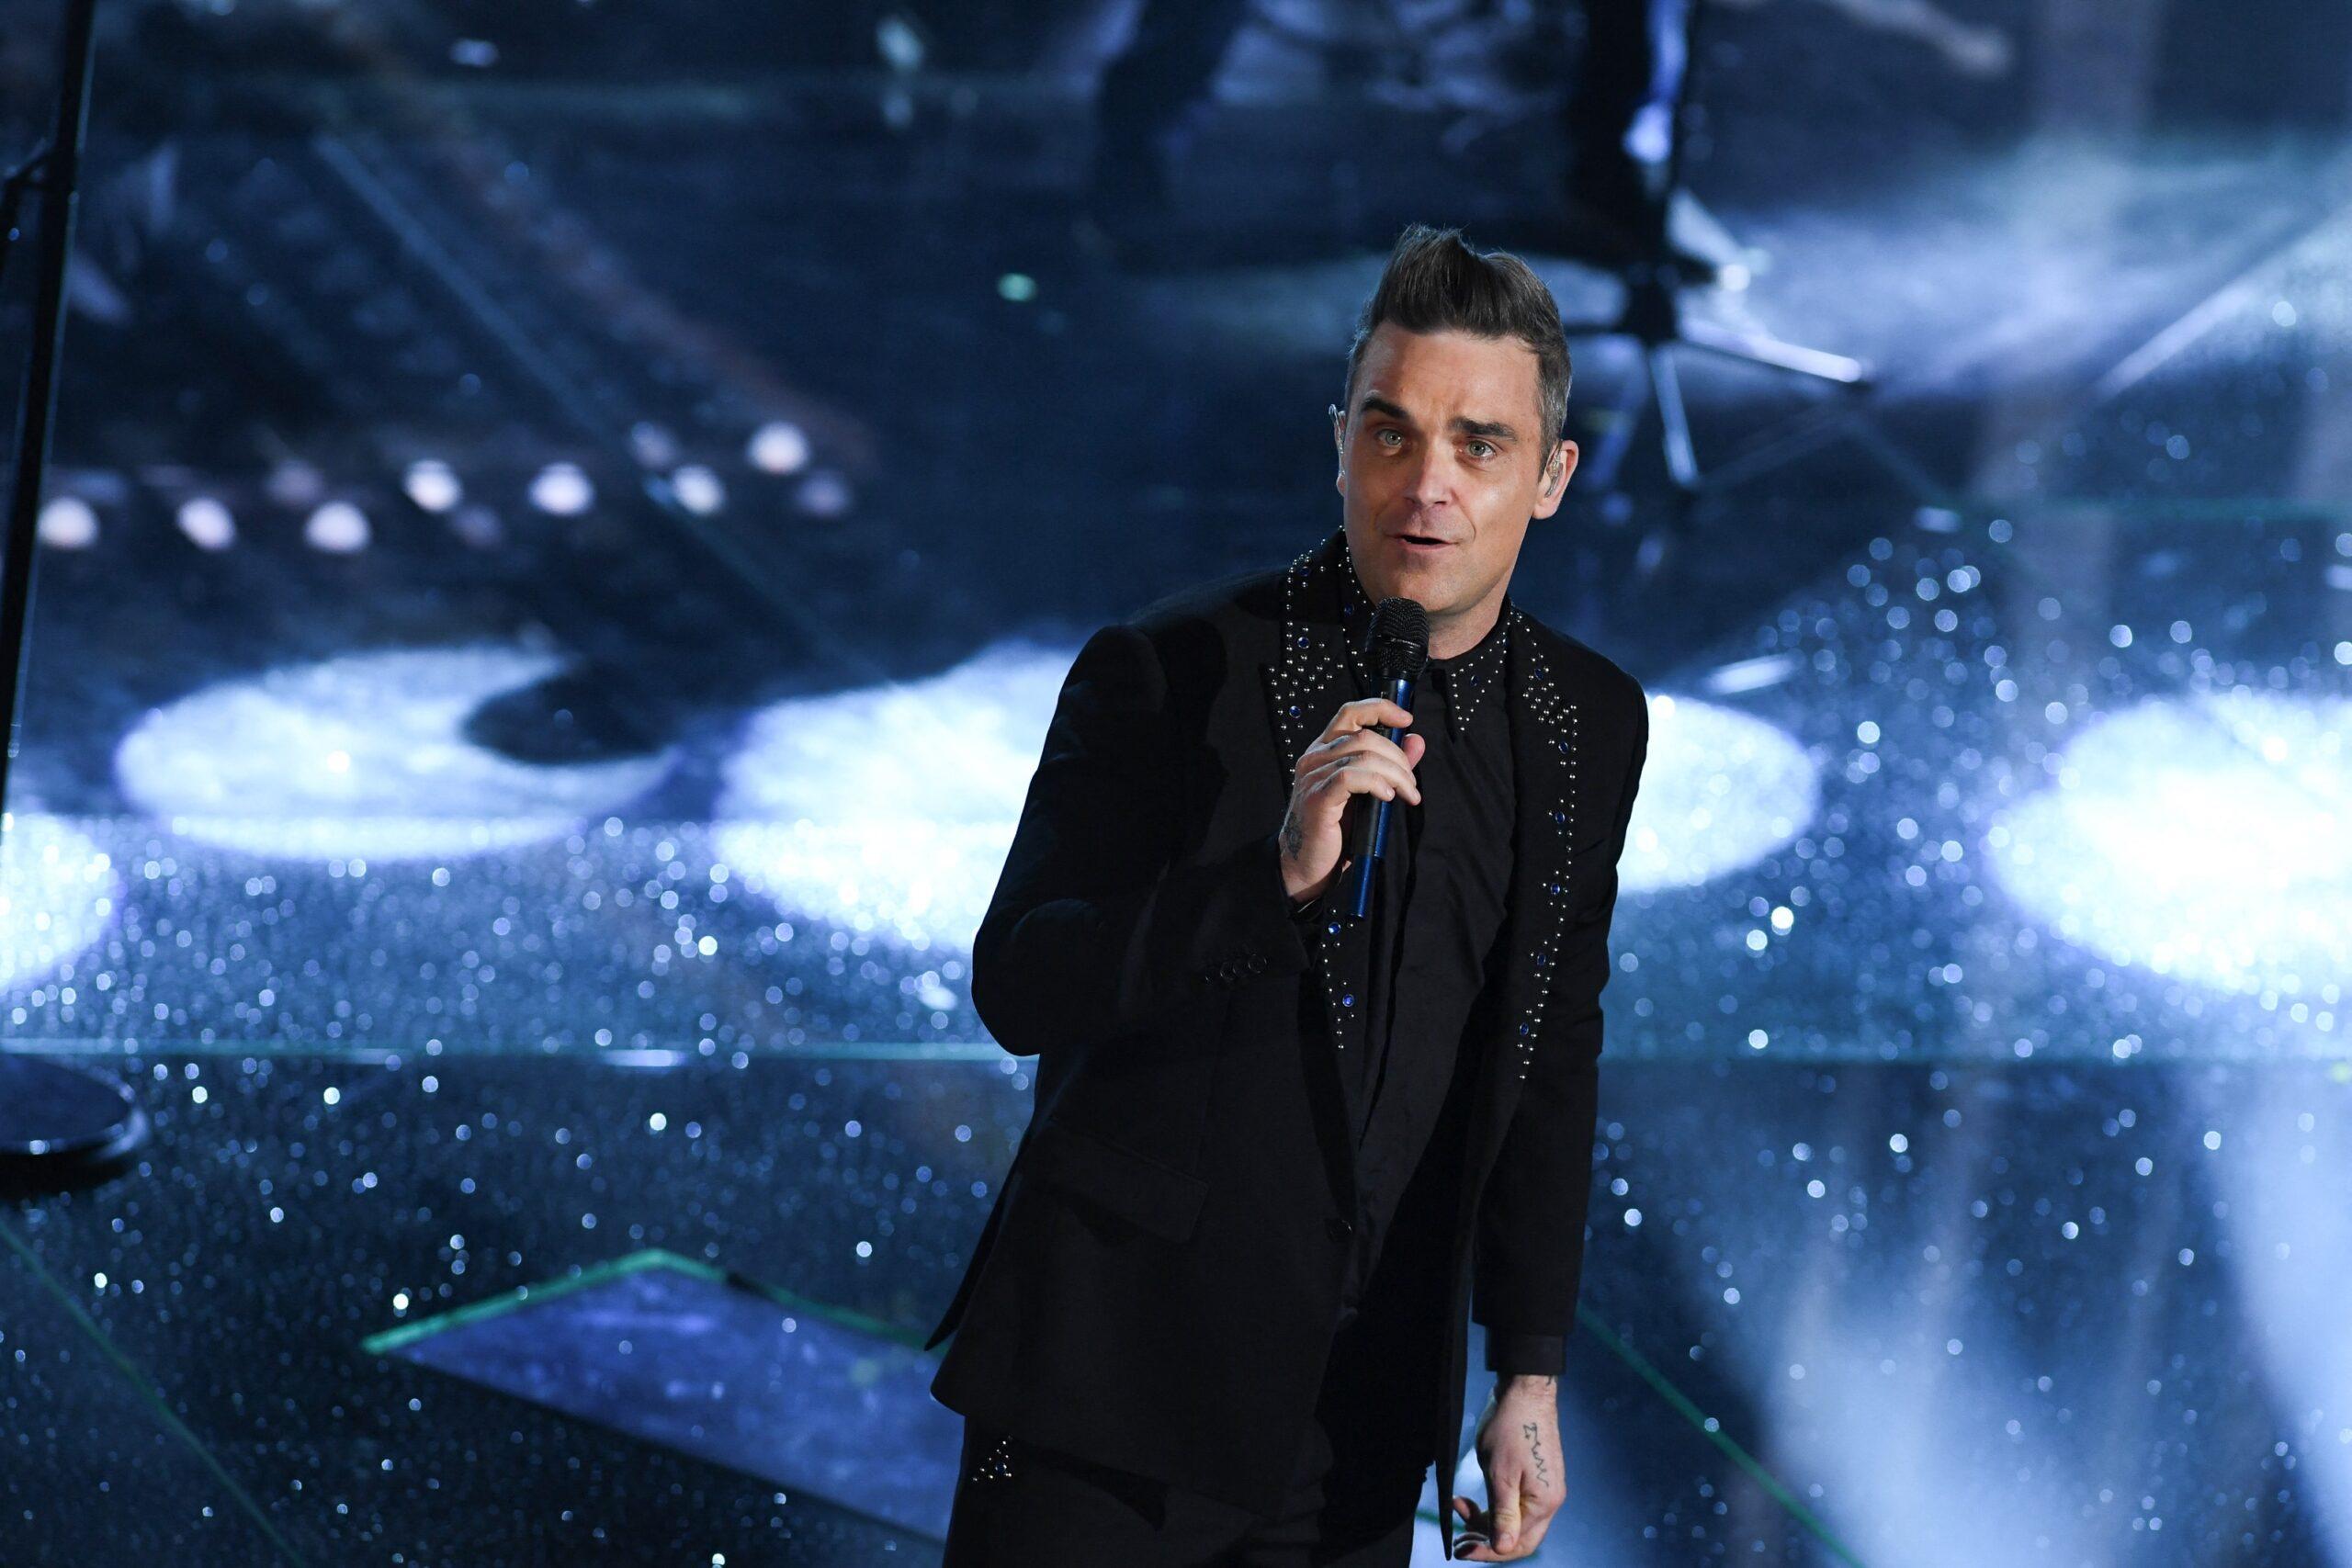 Singer Robbie Williams Says Being Overweight Was 'Catastrophic' After Ozempic-Related 2 Stone Weight Loss